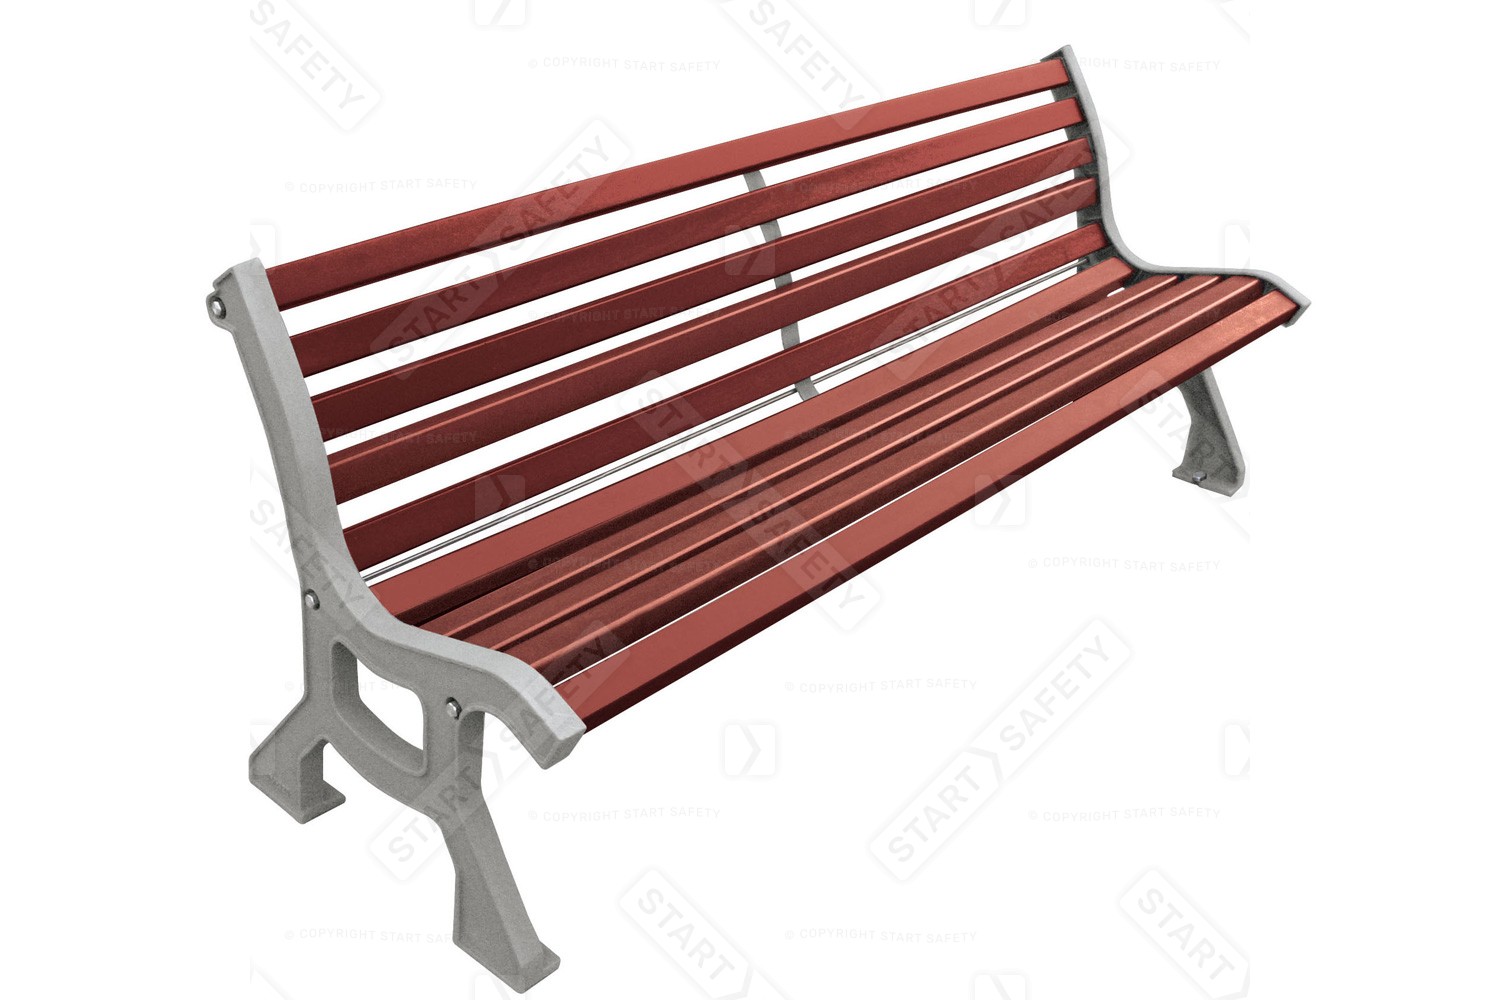 Procity Lublin Steel And Wood Bench